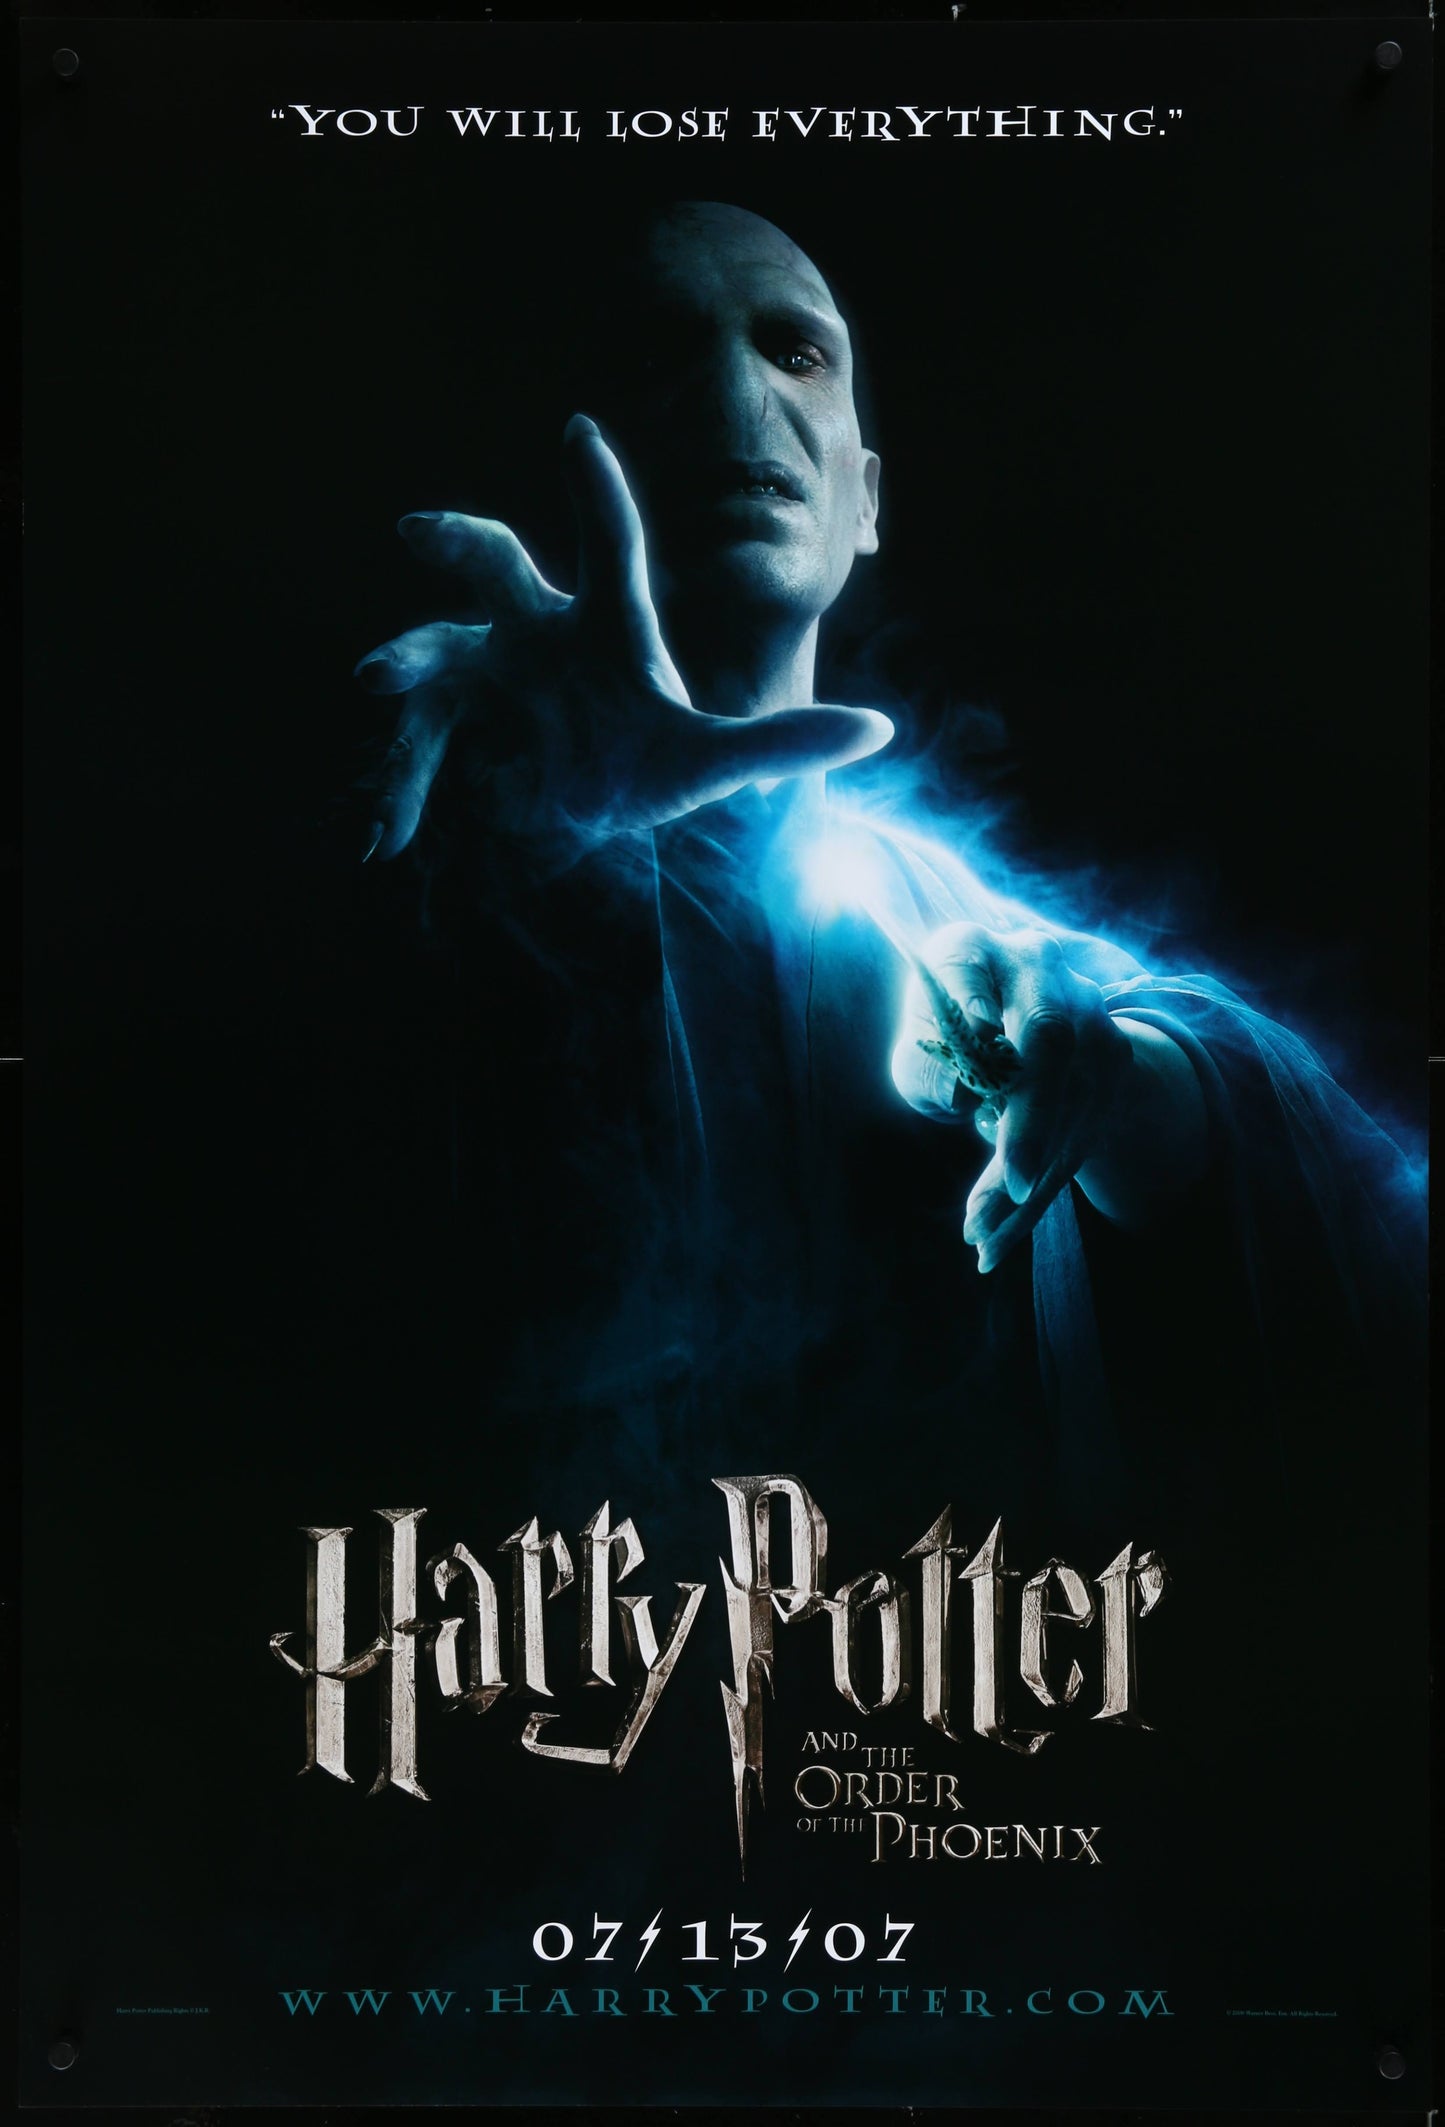 Harry Potter And The Order Of The Phoenix - posterpalace.com